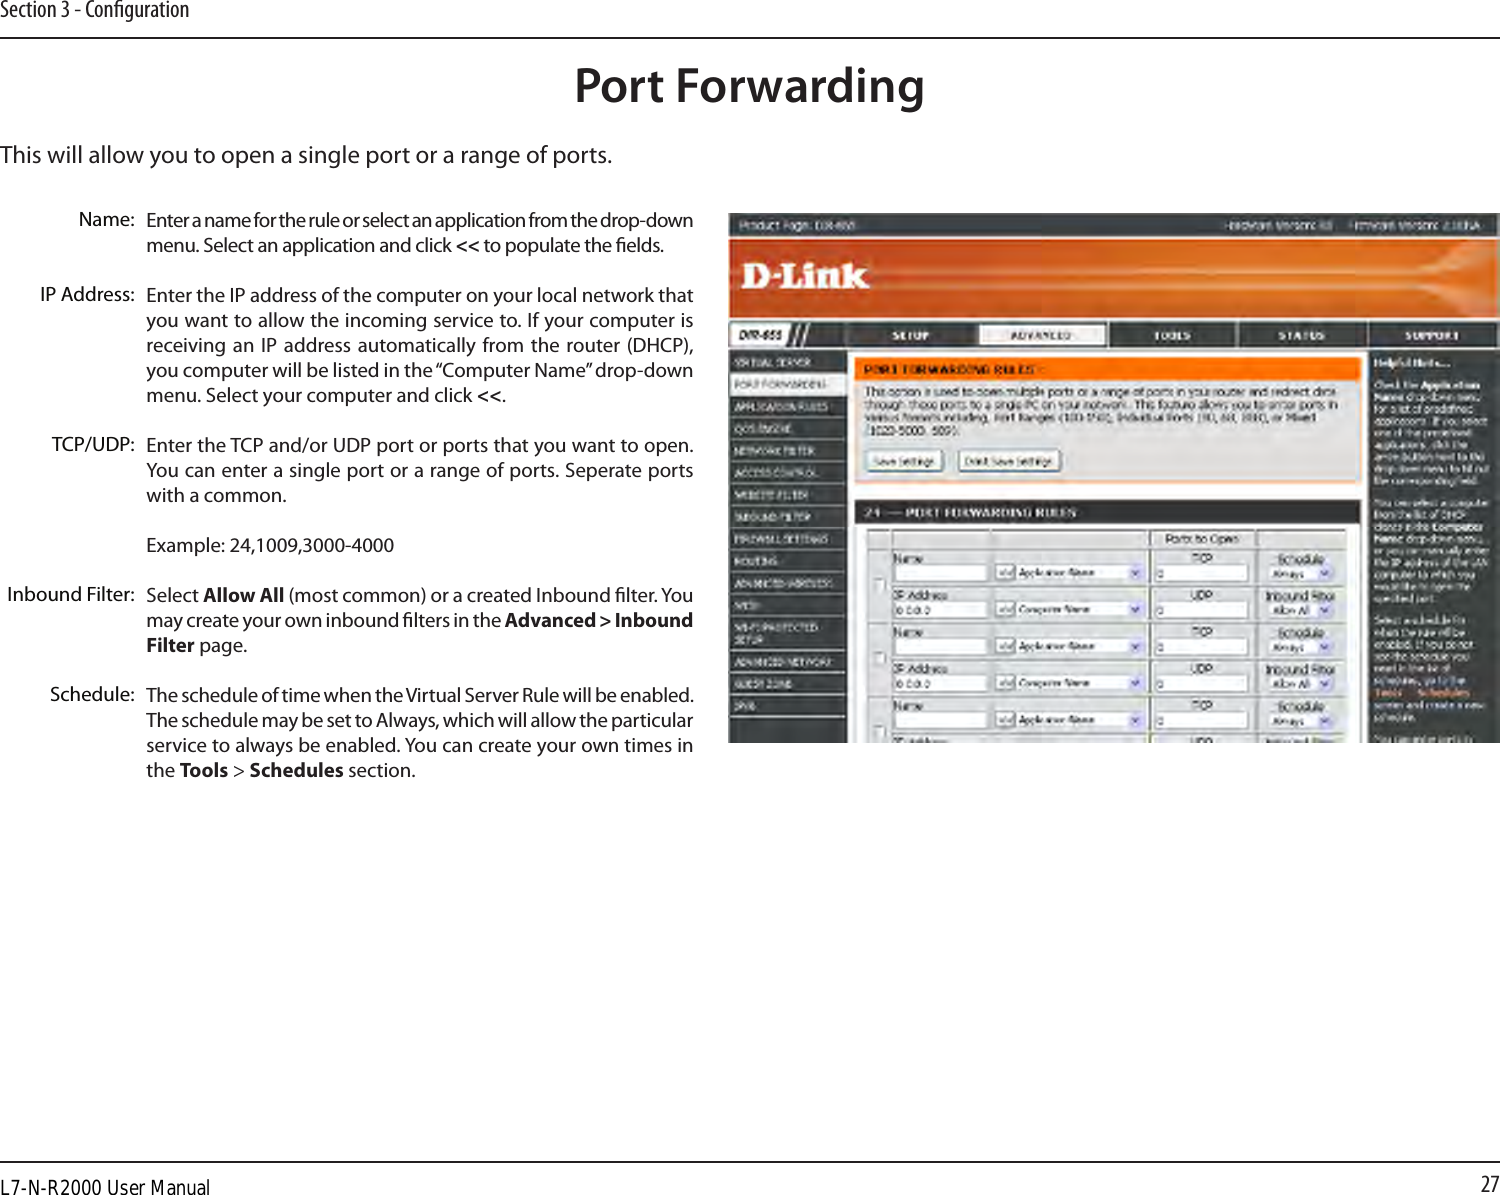 27Section 3 - CongurationThis will allow you to open a single port or a range of ports.Port ForwardingEnter a name for the rule or select an application from the drop-down menu. Select an application and click &lt;&lt; to populate the elds.Enter the IP address of the computer on your local network that you want to allow the incoming service to. If your computer is receiving an IP  address automatically from the  router (DHCP), you computer will be listed in the “Computer Name” drop-down menu. Select your computer and click &lt;&lt;. Enter the TCP and/or UDP port or ports that you want to open. You can enter a single port or a range of ports. Seperate ports with a common.Example: 24,1009,3000-4000Select Allow All (most common) or a created Inbound lter. You may create your own inbound lters in the Advanced &gt; Inbound Filter page.The schedule of time when the Virtual Server Rule will be enabled. The schedule may be set to Always, which will allow the particular service to always be enabled. You can create your own times in the Tools &gt; Schedules section.Name:IP Address:TCP/UDP:Inbound Filter:Schedule:L7-N-R2000 User Manual